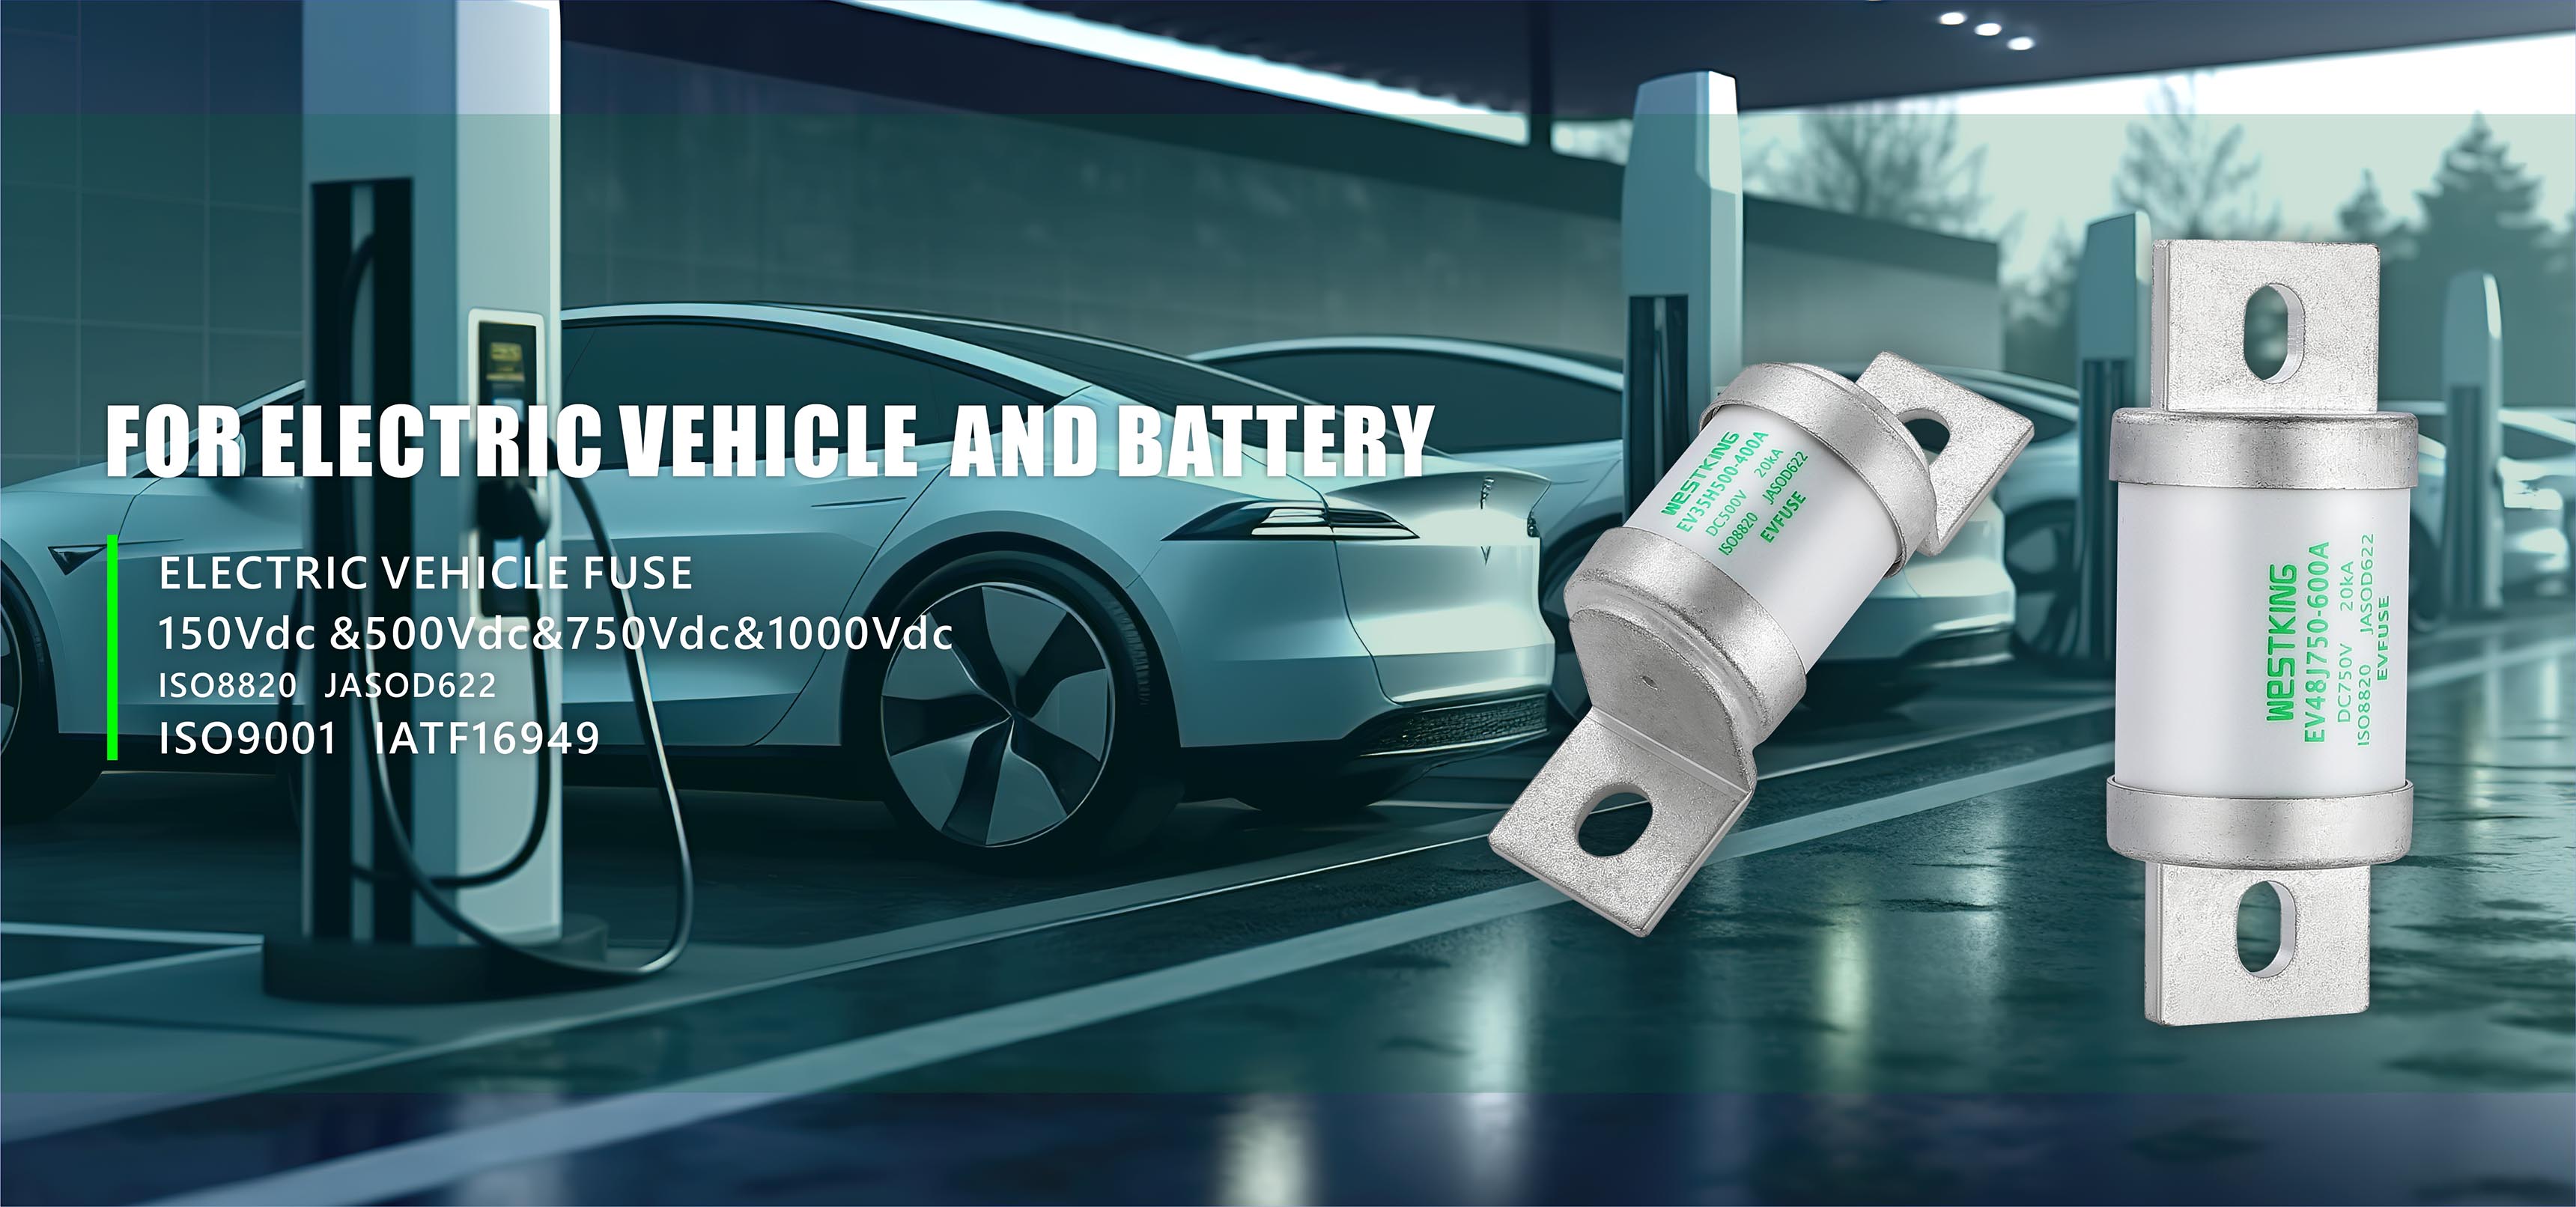 EV FUSE for Electric Vehicle and Battery Factory